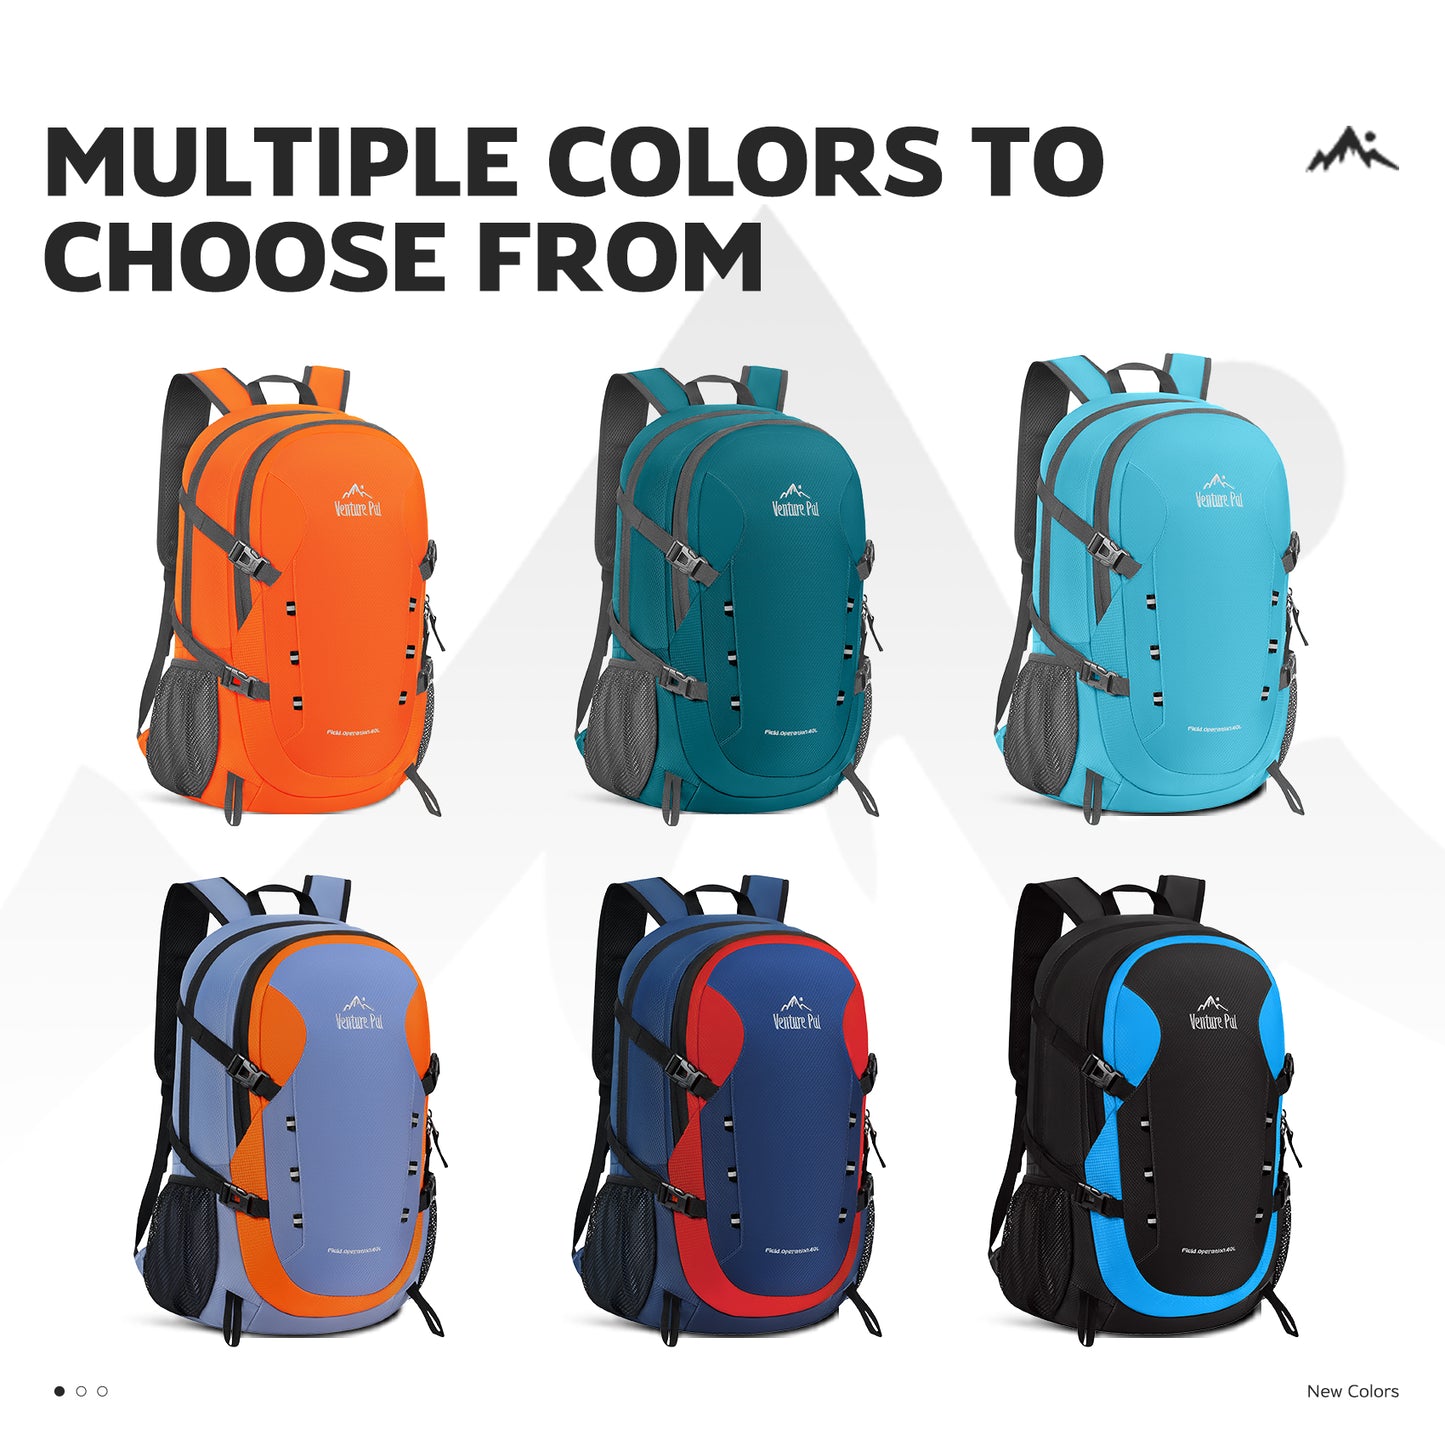 Venture Pal Blue 40L Nylon Backpack with Wet Pocket and Multi Compartment